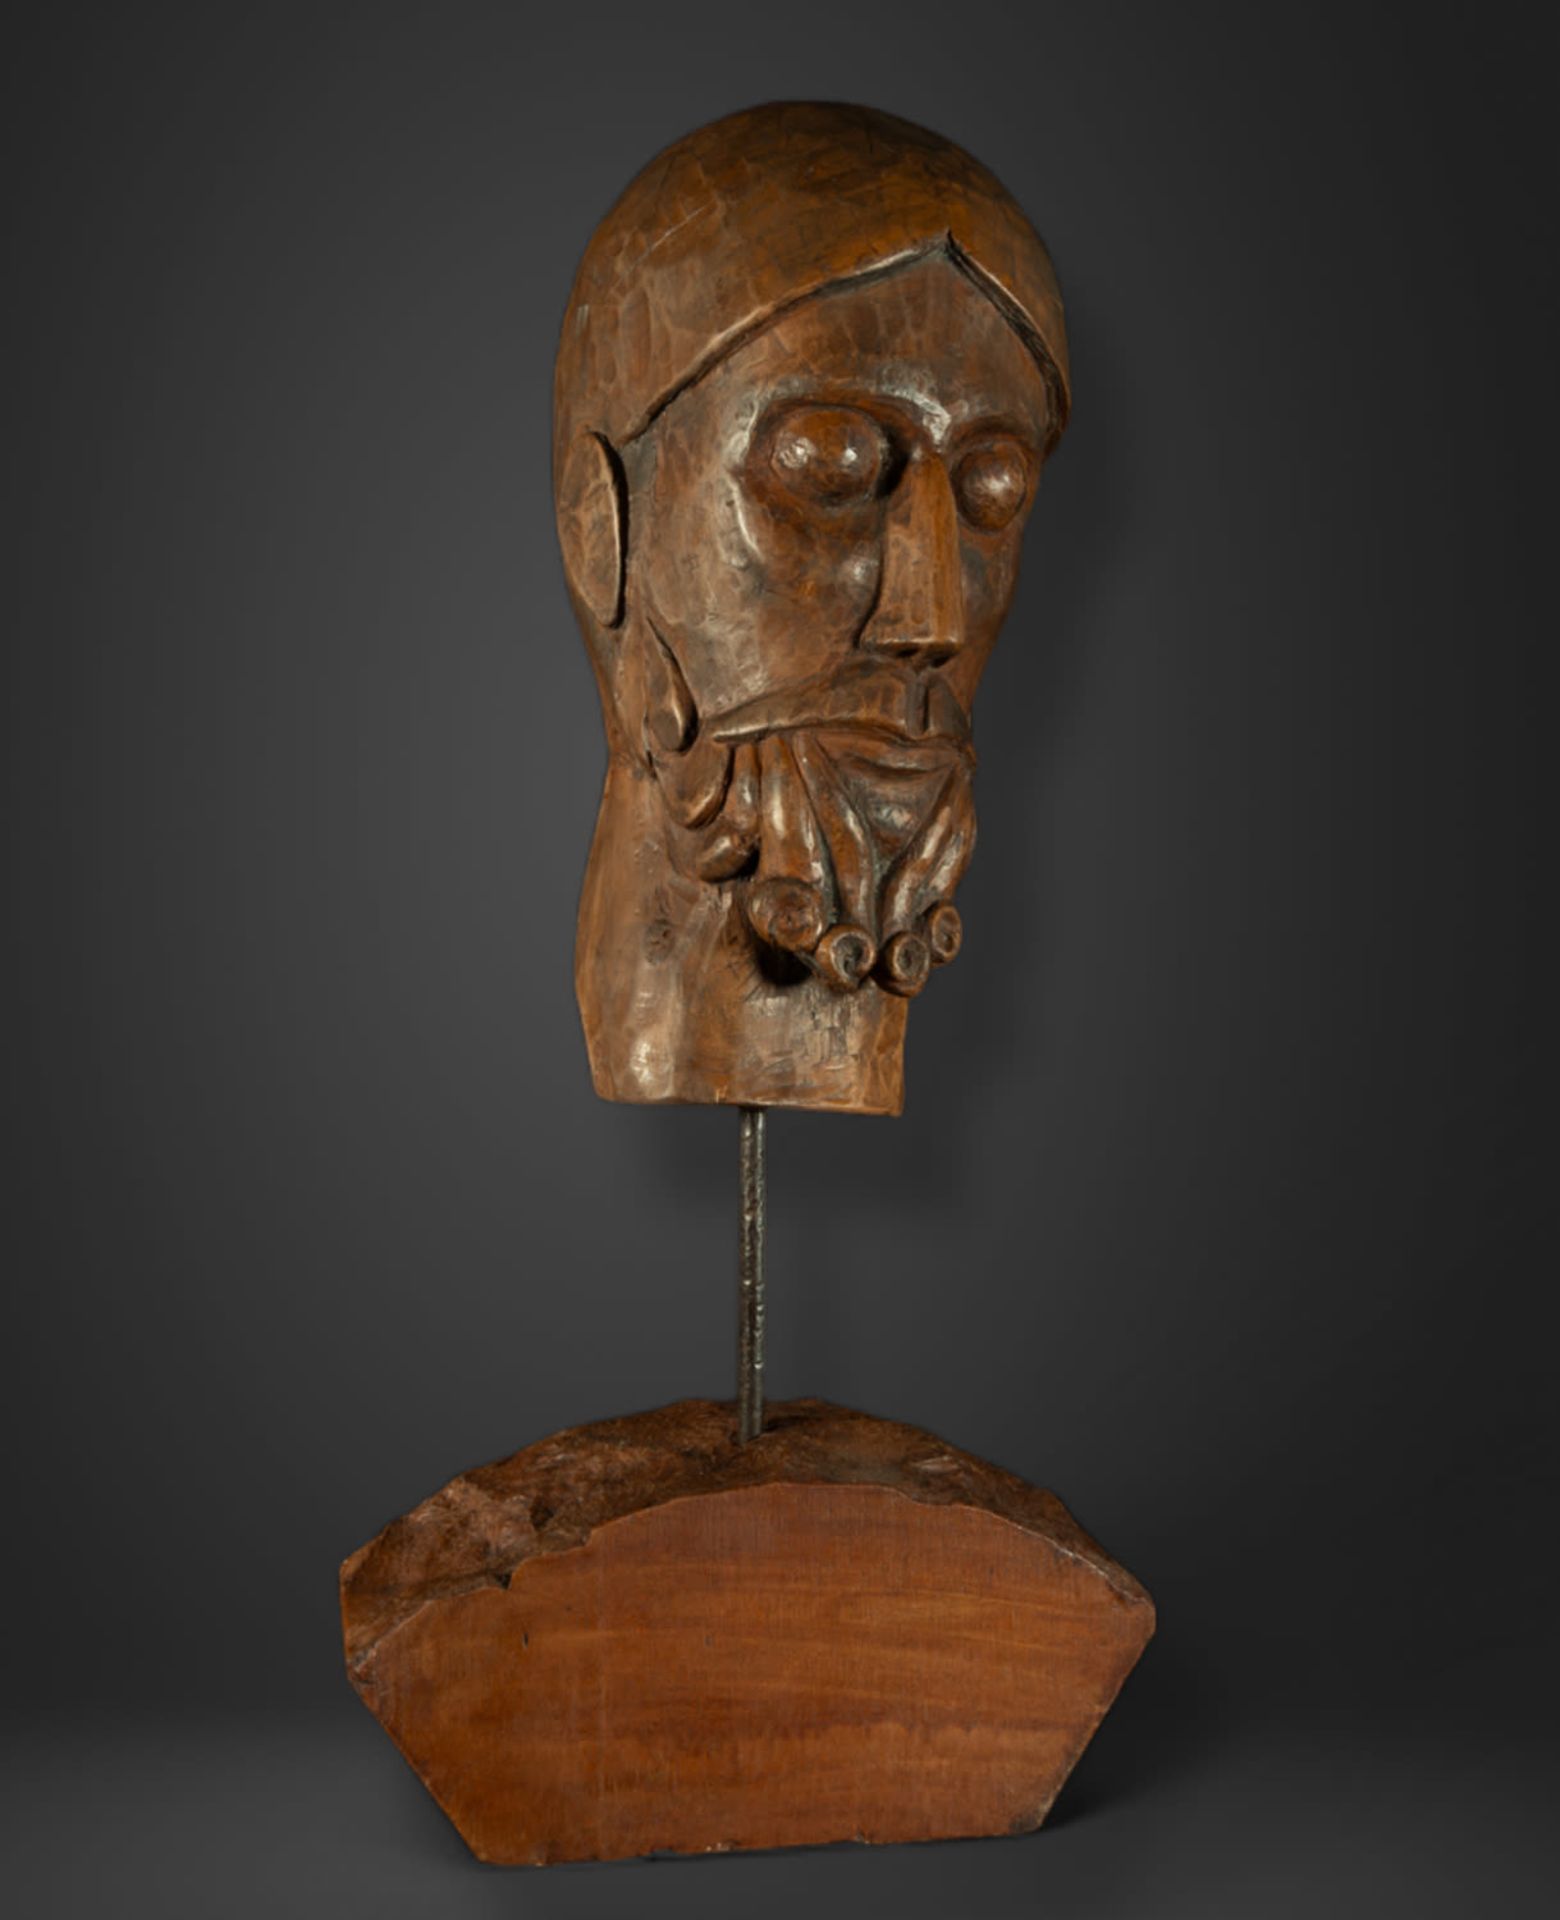 Head of Christ, Goa, Portuguese colonial work from South India, 18th century